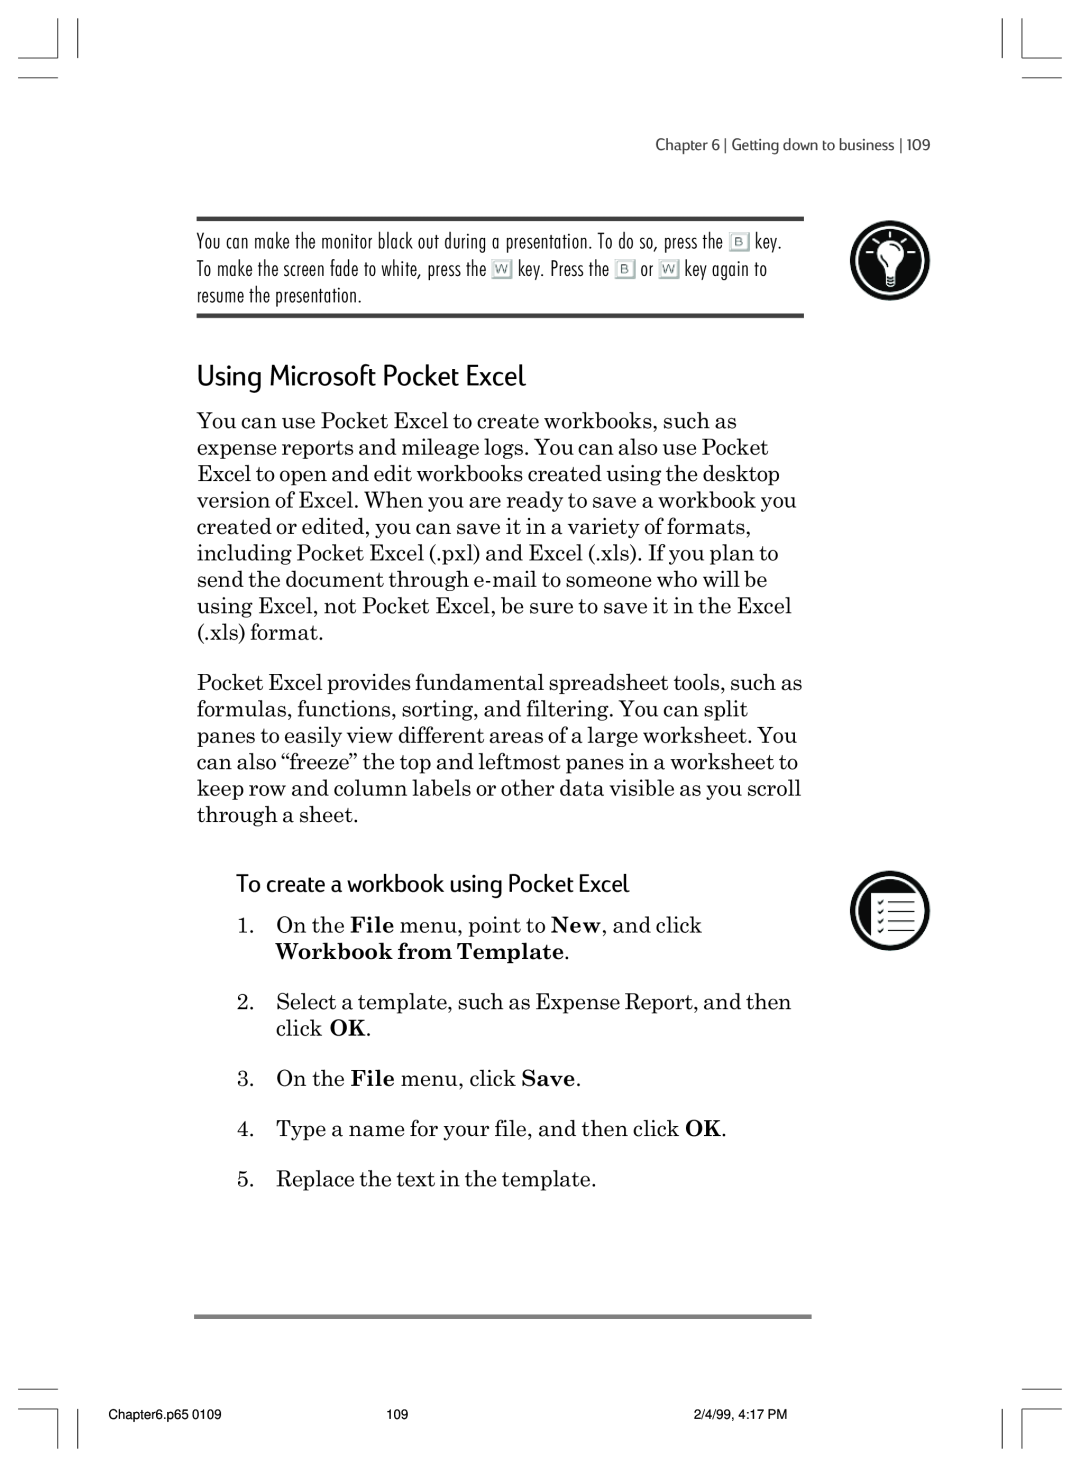 HP 820 E manual Using Microsoft Pocket Excel, To create a workbook using Pocket Excel 